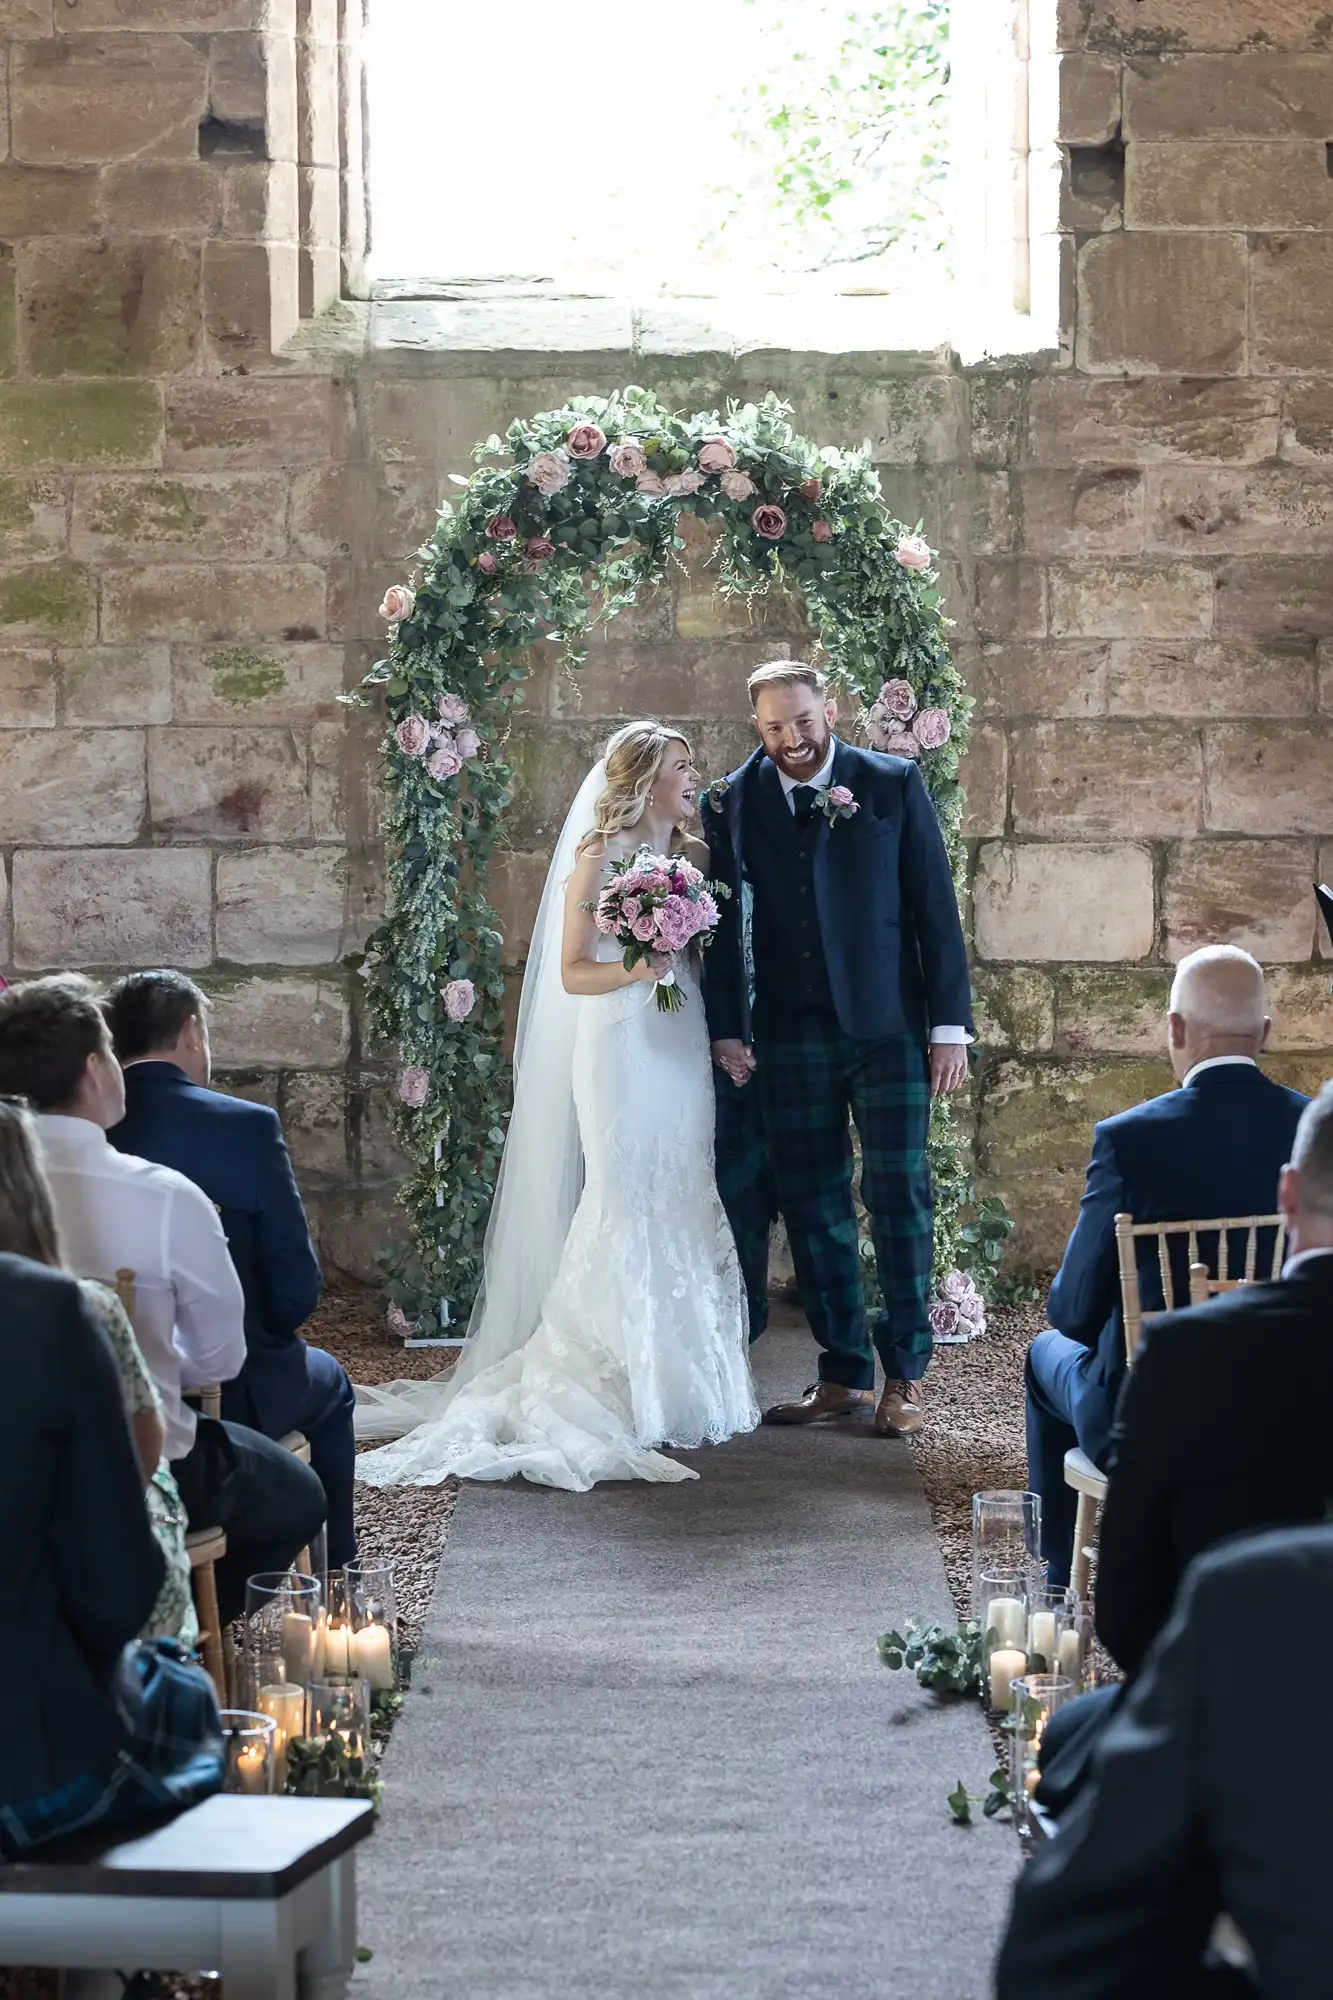 Bride and groom walking hand in hand down the aisle in a historic building, with guests seated on either side and a floral arch at the entrance.